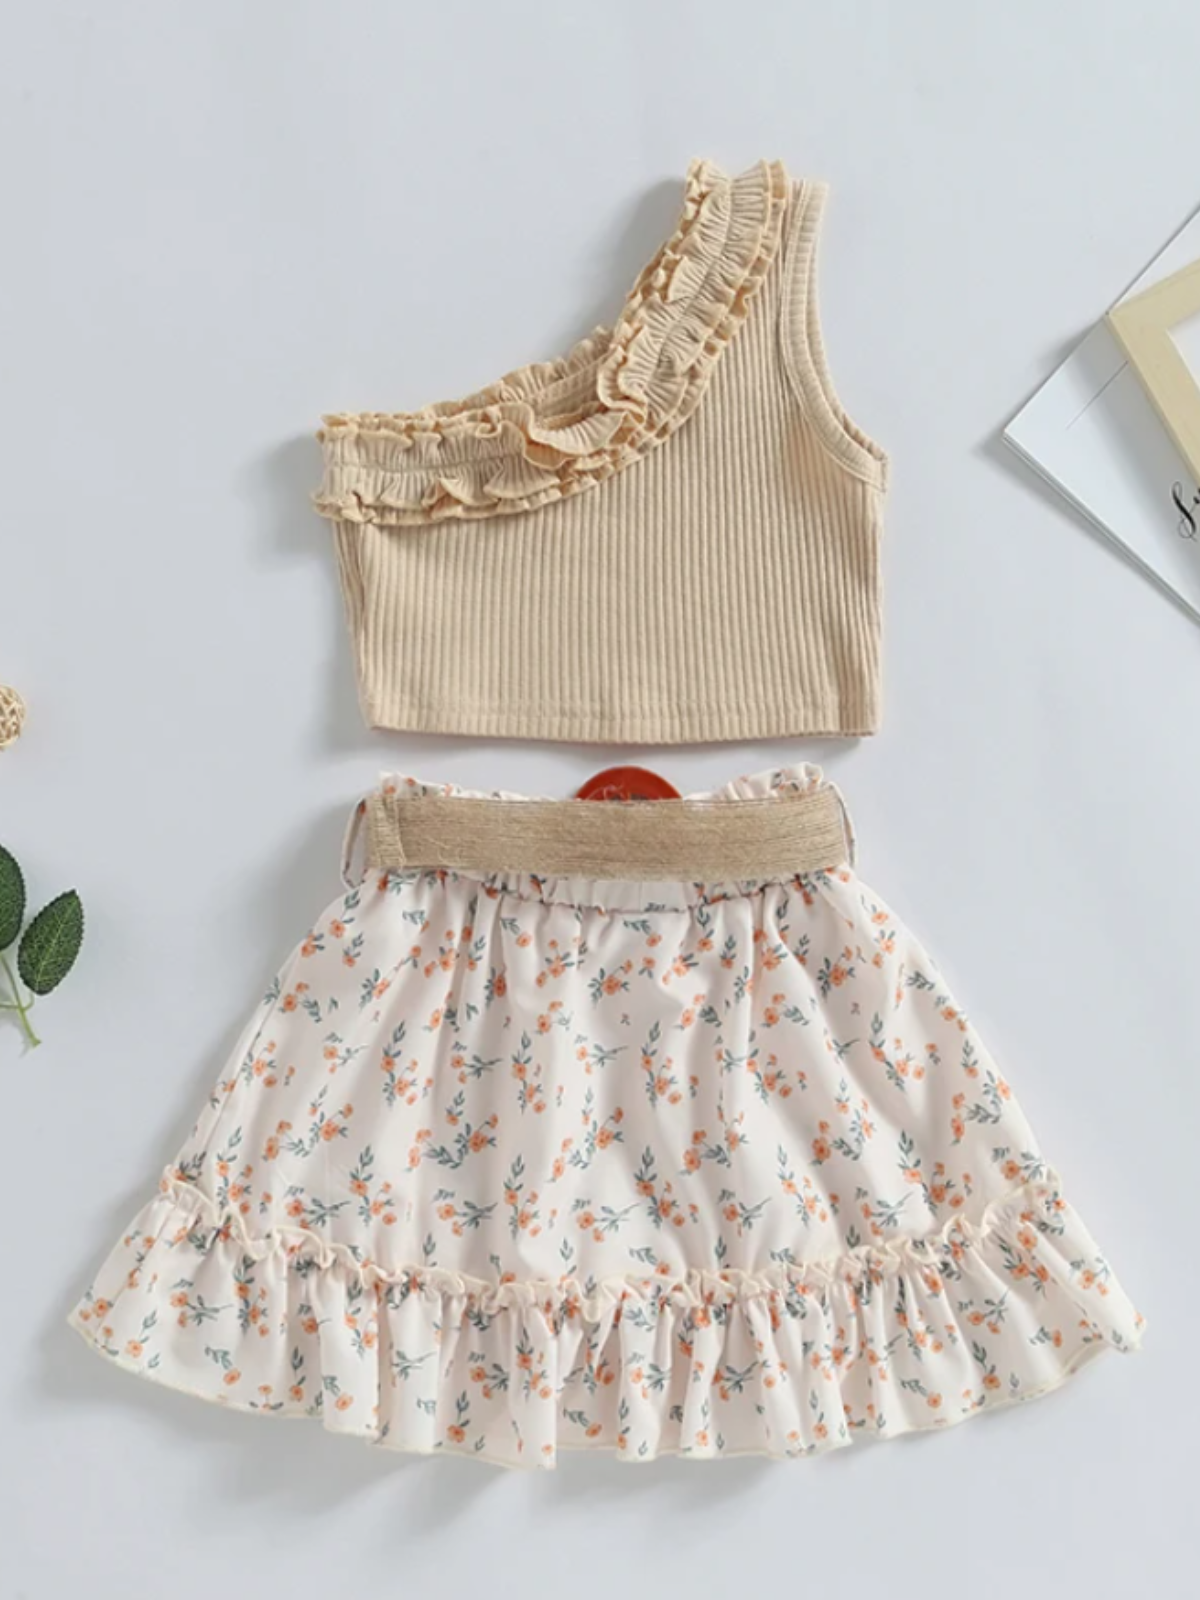 Mia Belle Girls Floral Skirt Set | Girls Spring Outfits